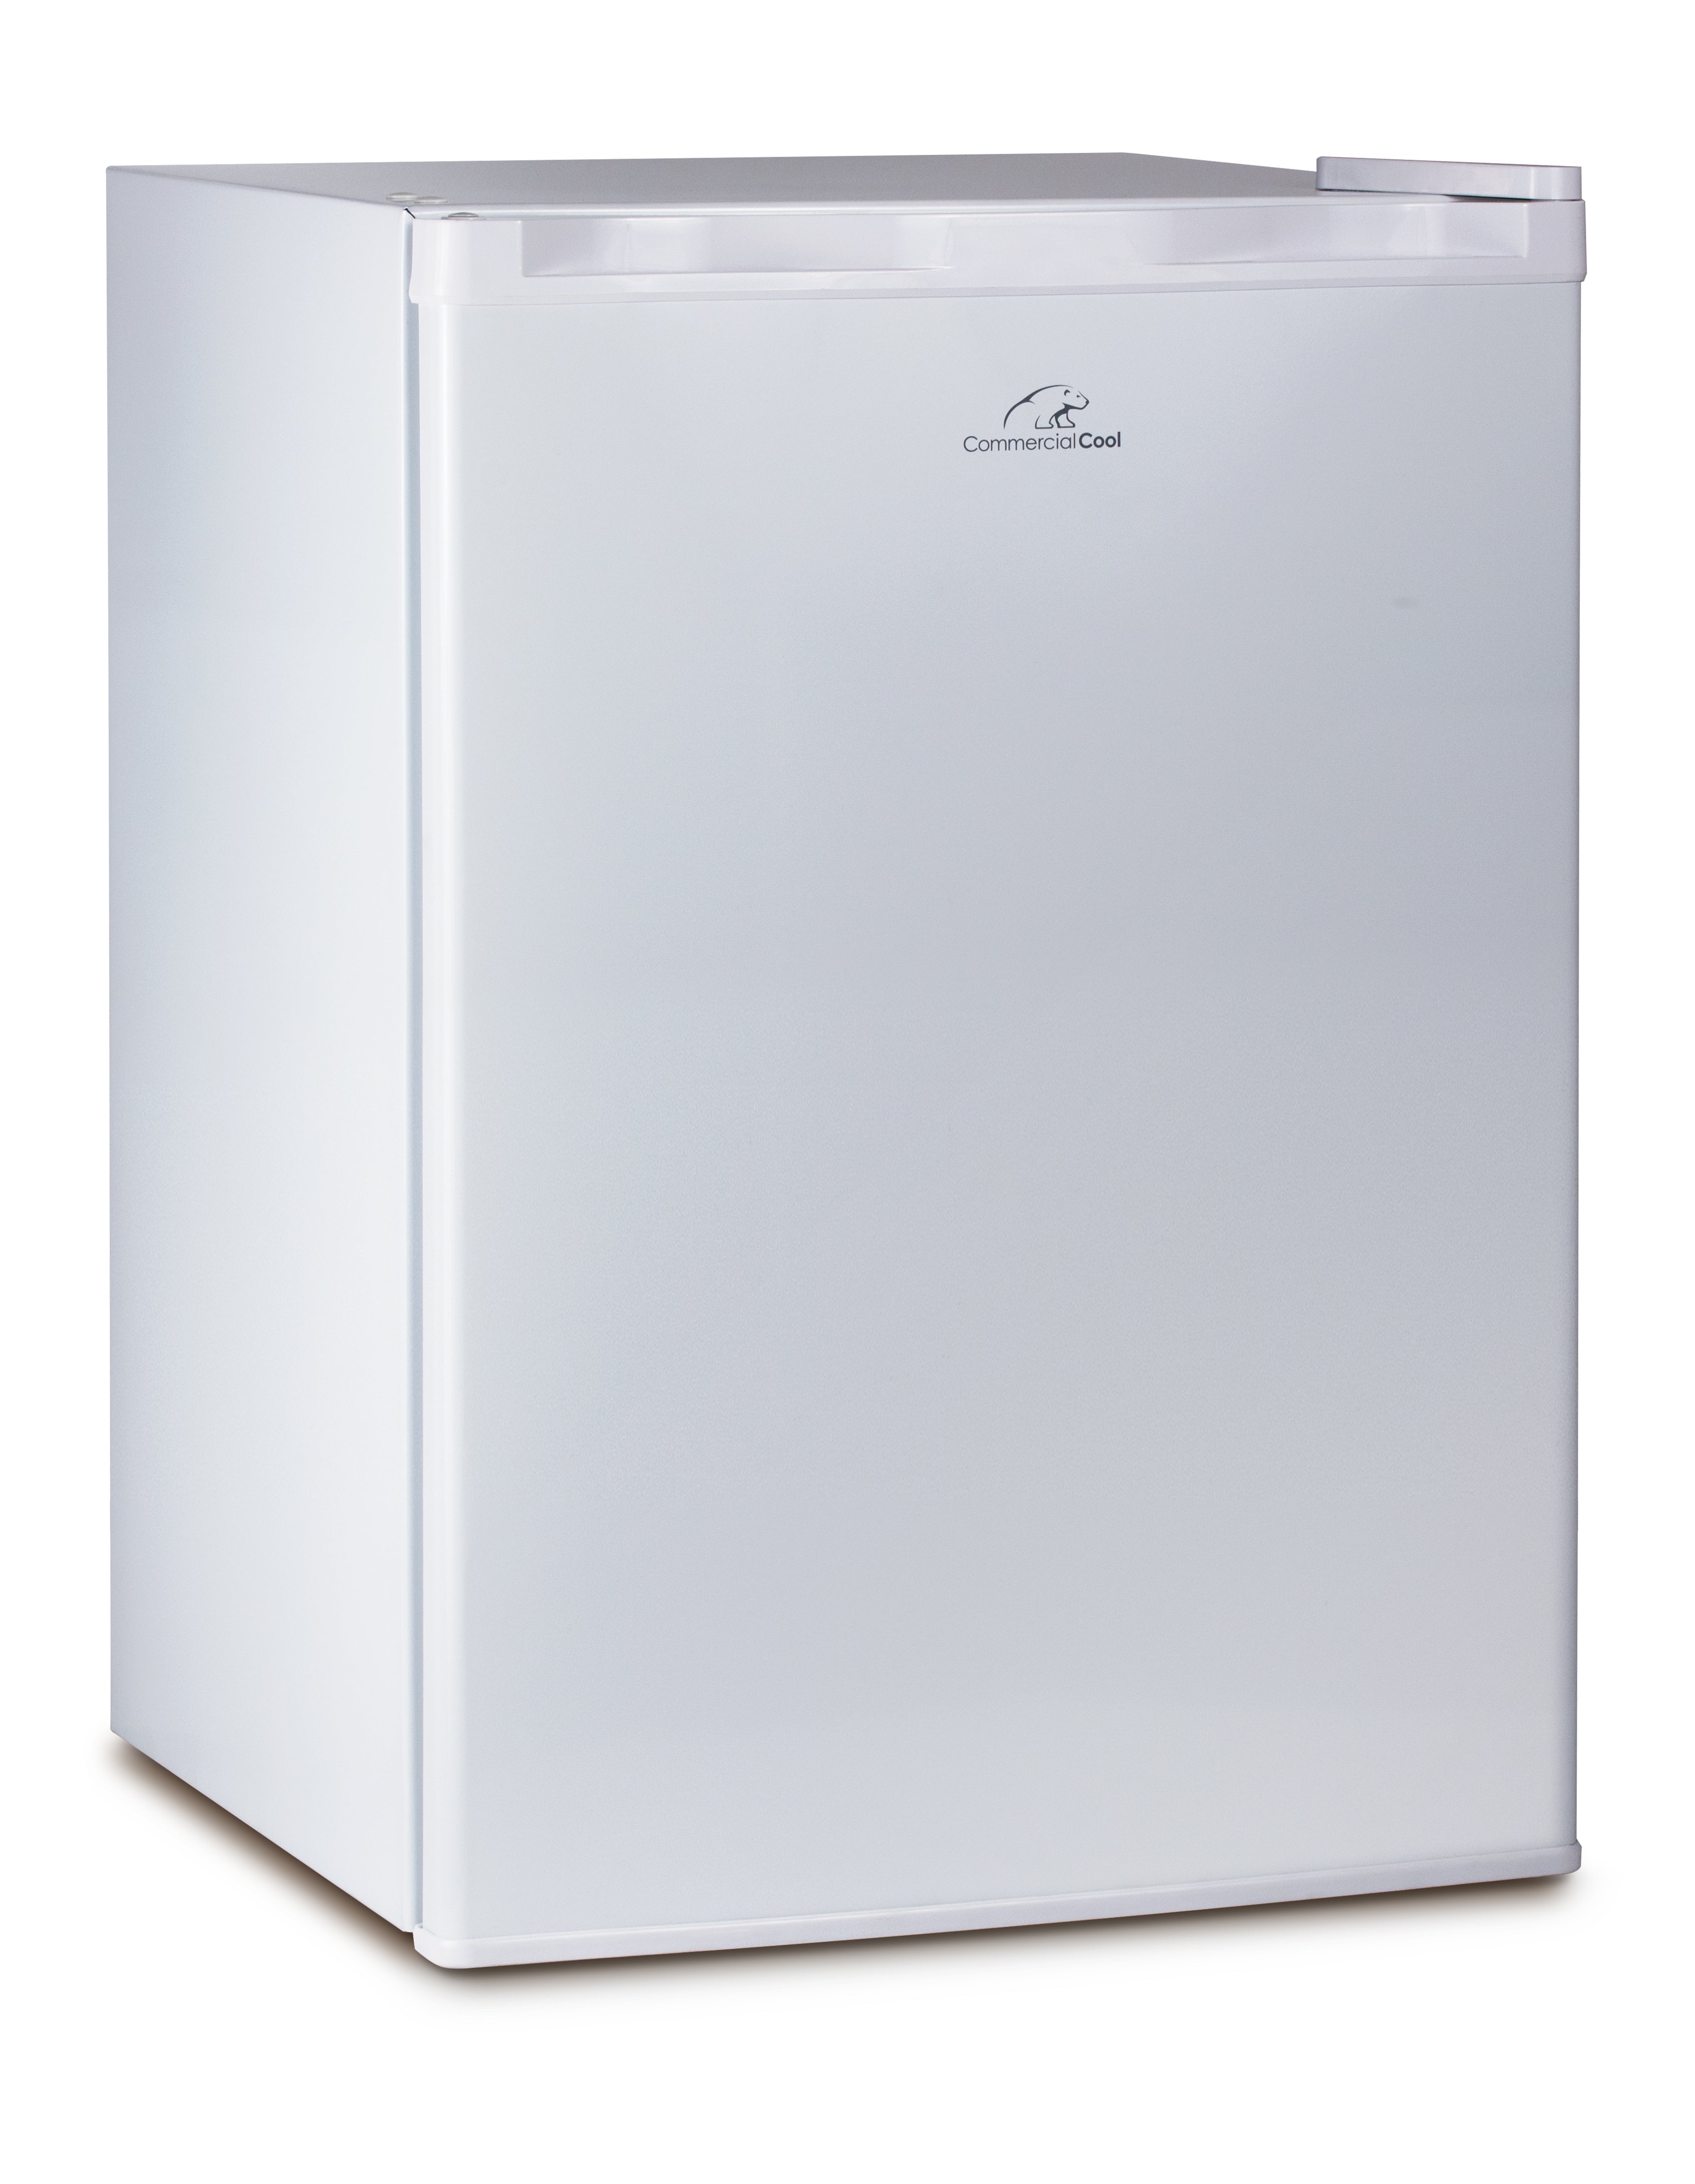 COMMERCIAL COOL Refrigerator and Freezer 2.6 Cu. Ft., White